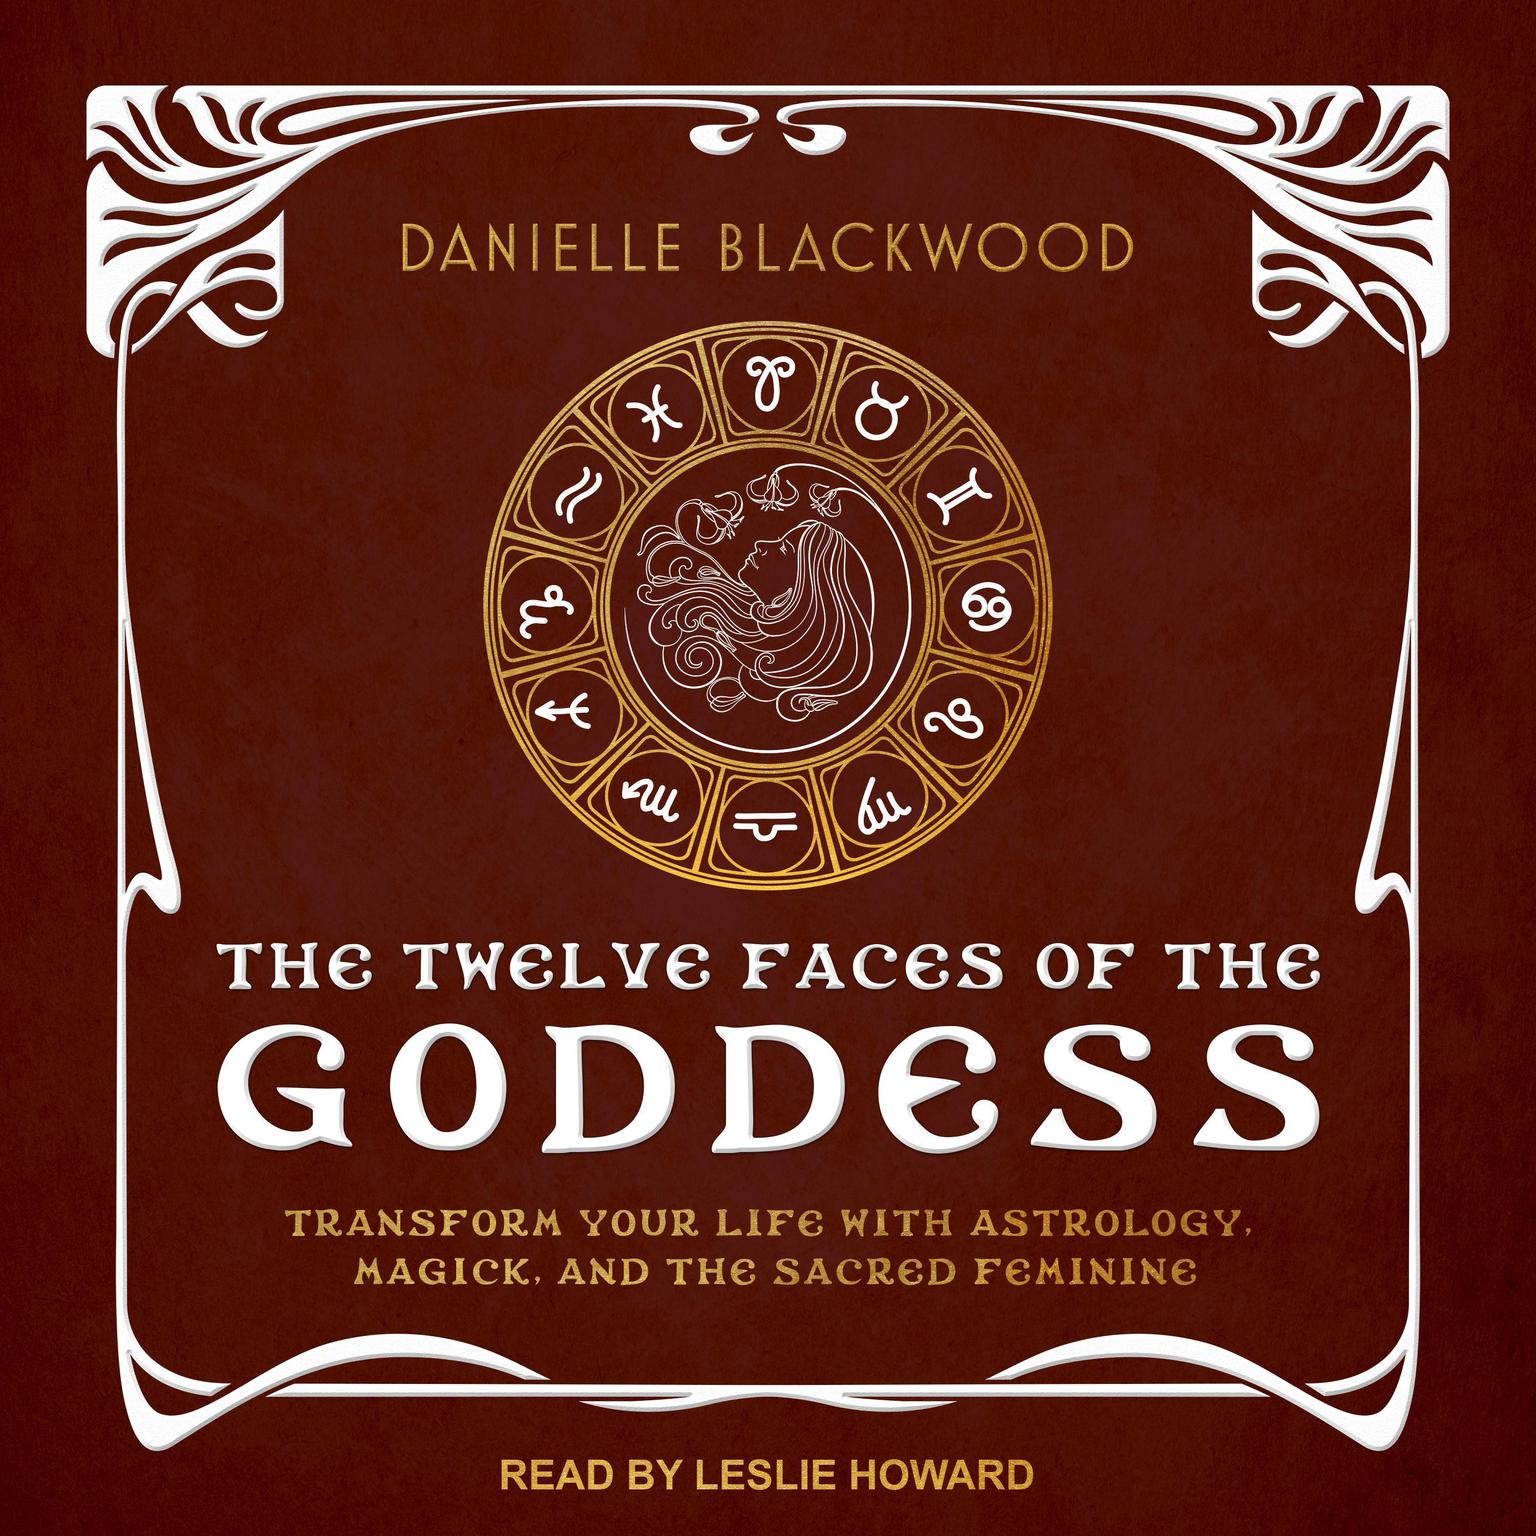 The Twelve Faces of the Goddess: Transform Your Life with Astrology, Magick, and the Sacred Feminine Audiobook, by Danielle Blackwood